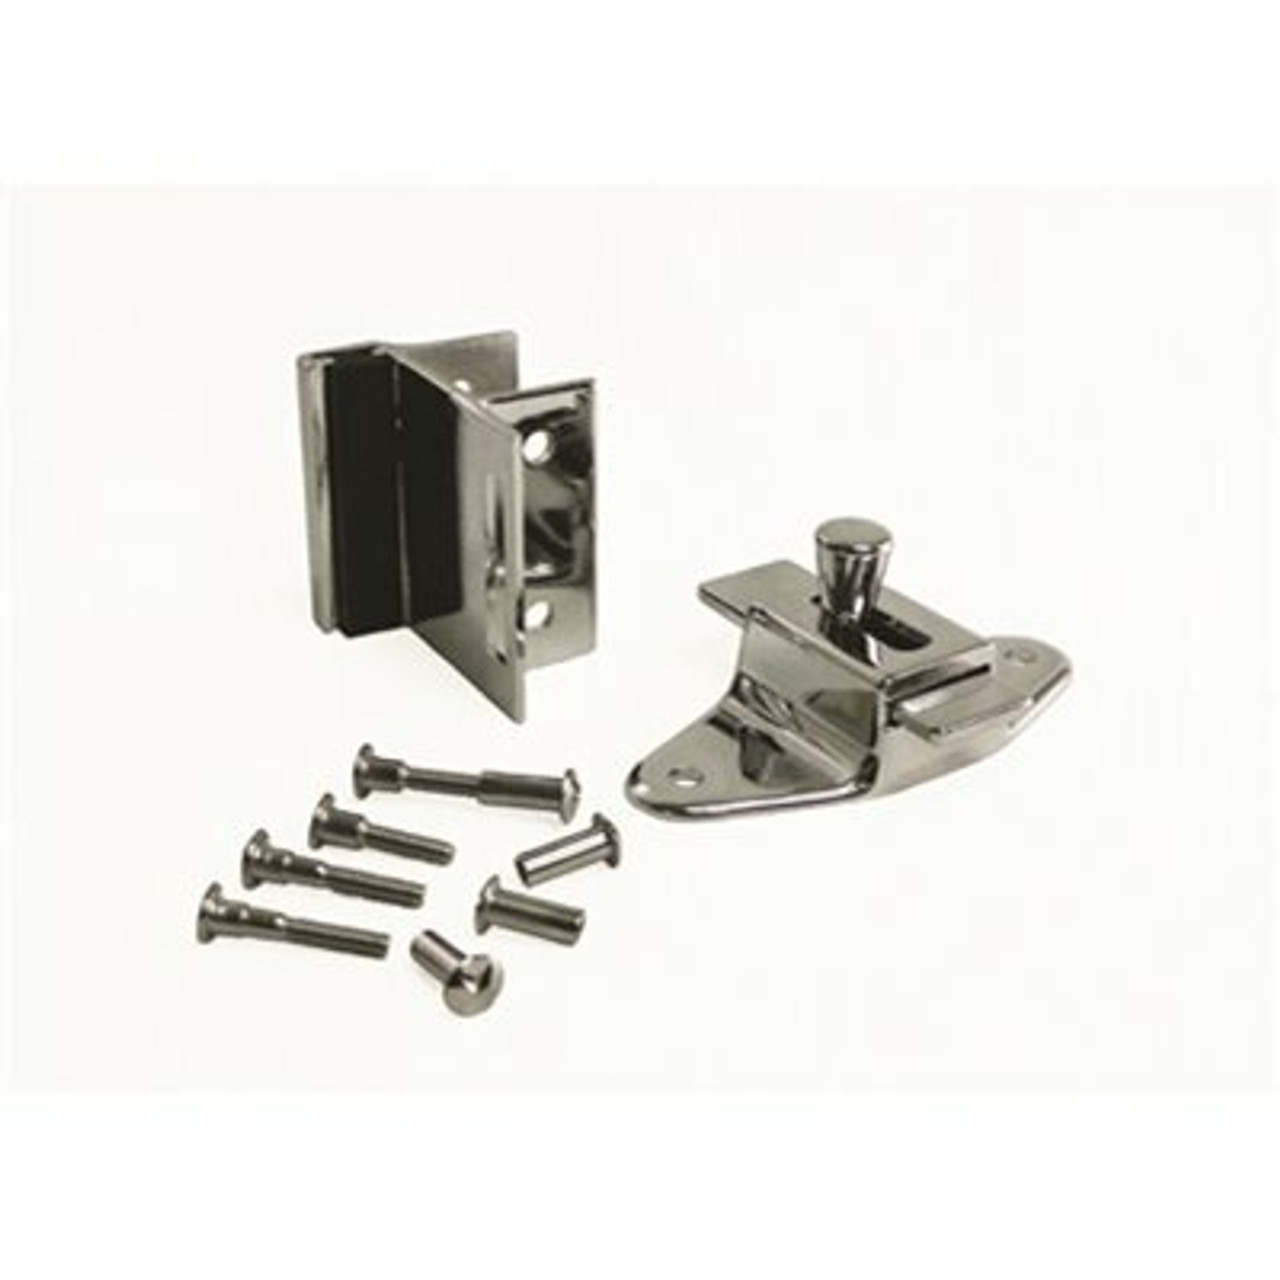 Strybuc Industries Slide Latch And Bumber Keeper Set For Laminate Door With Screws